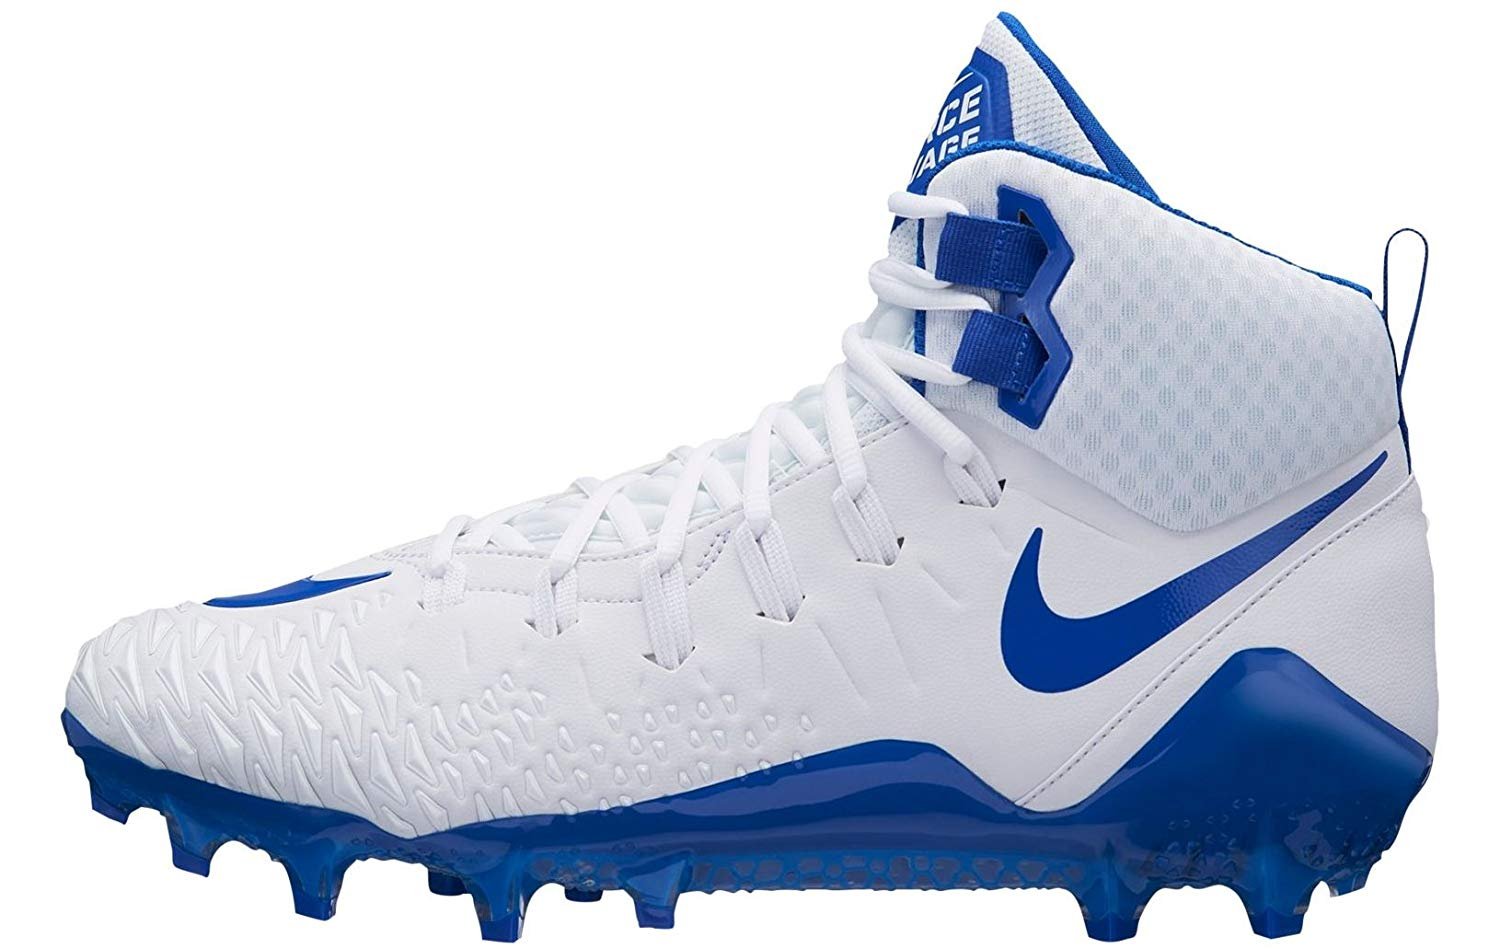 Nike Men's Force Savage Pro Football Cleat - image 2 of 4